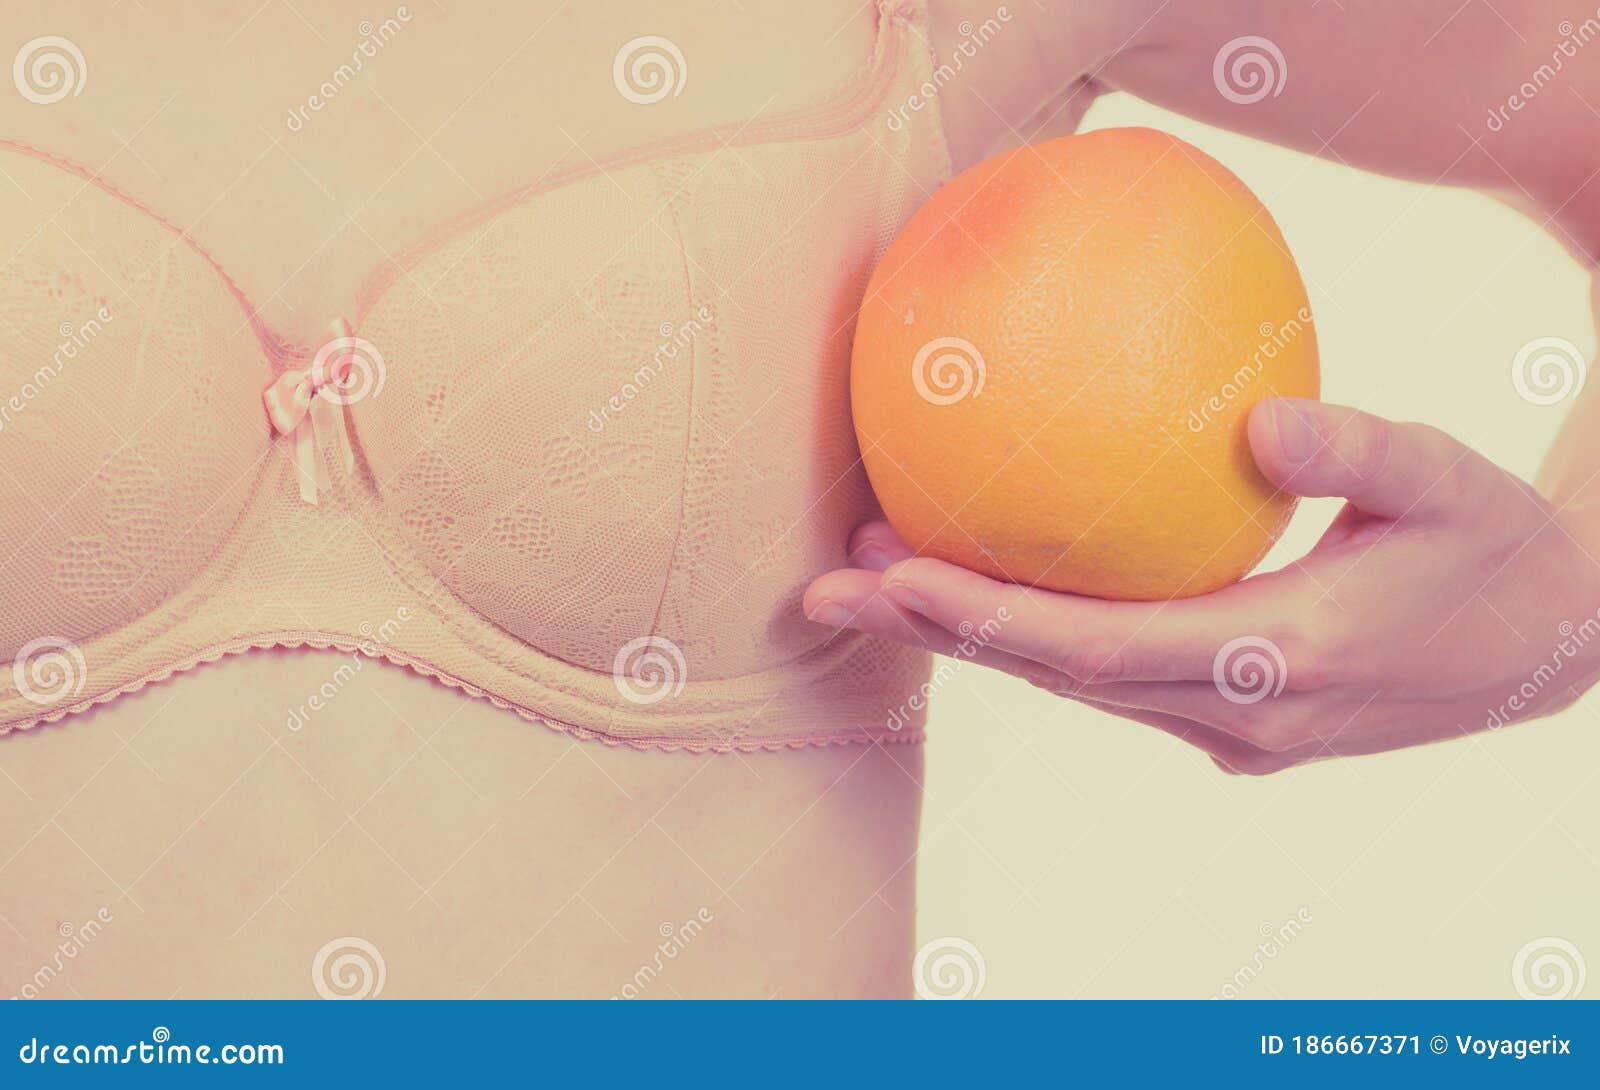 Woman Small Boobs Holds Big Orange Fruits Stock Image - Image of